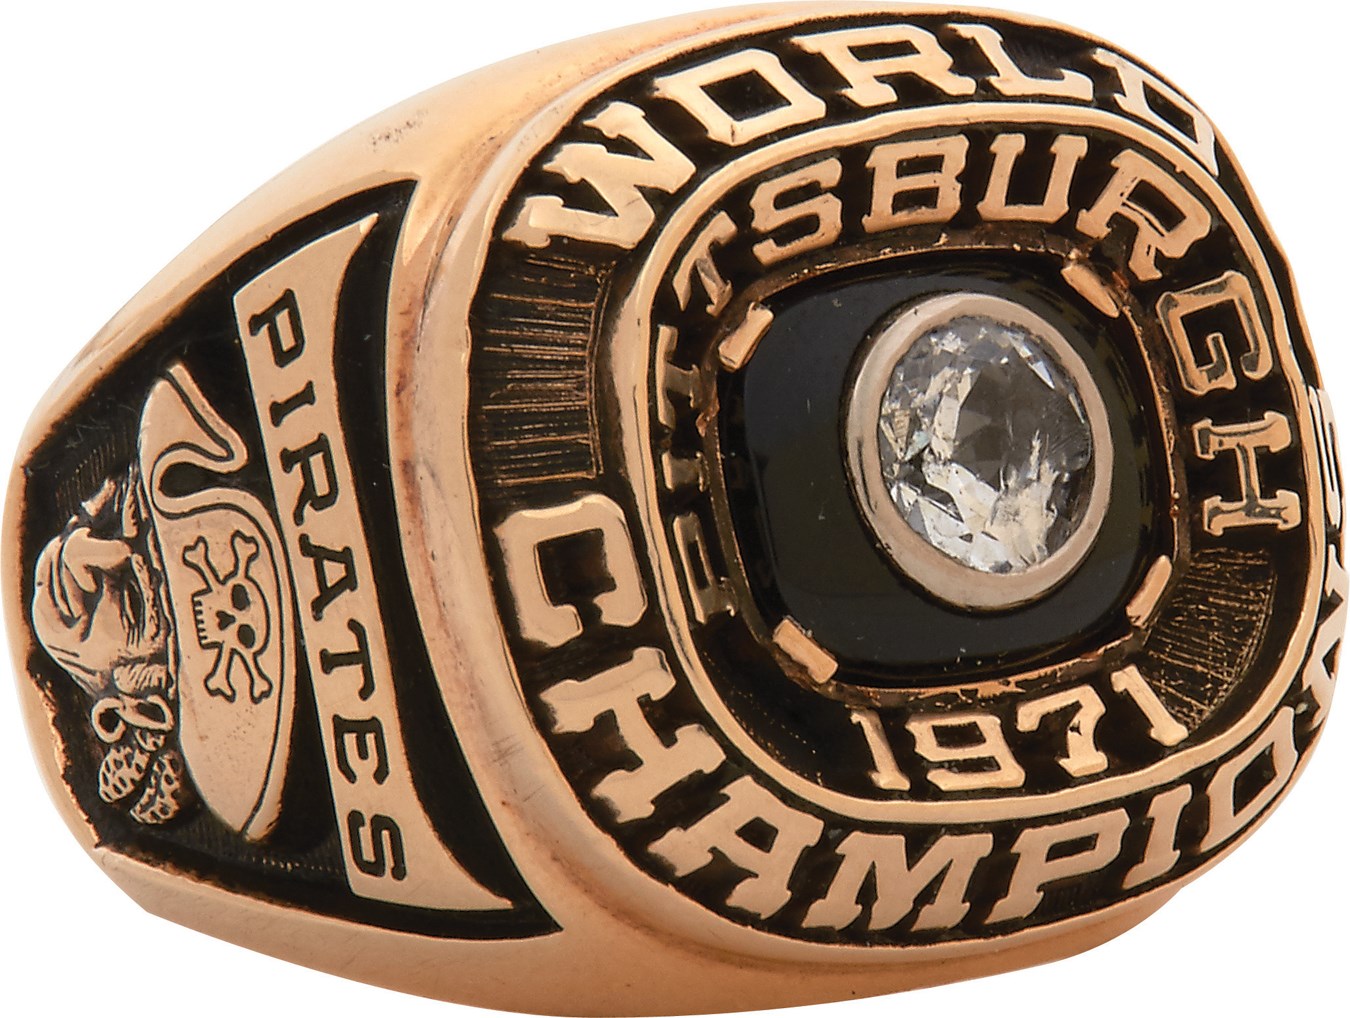 Clemente and Pittsburgh Pirates - 1971 Roberto Clemente Pittsburgh Pirates World Championship Ring